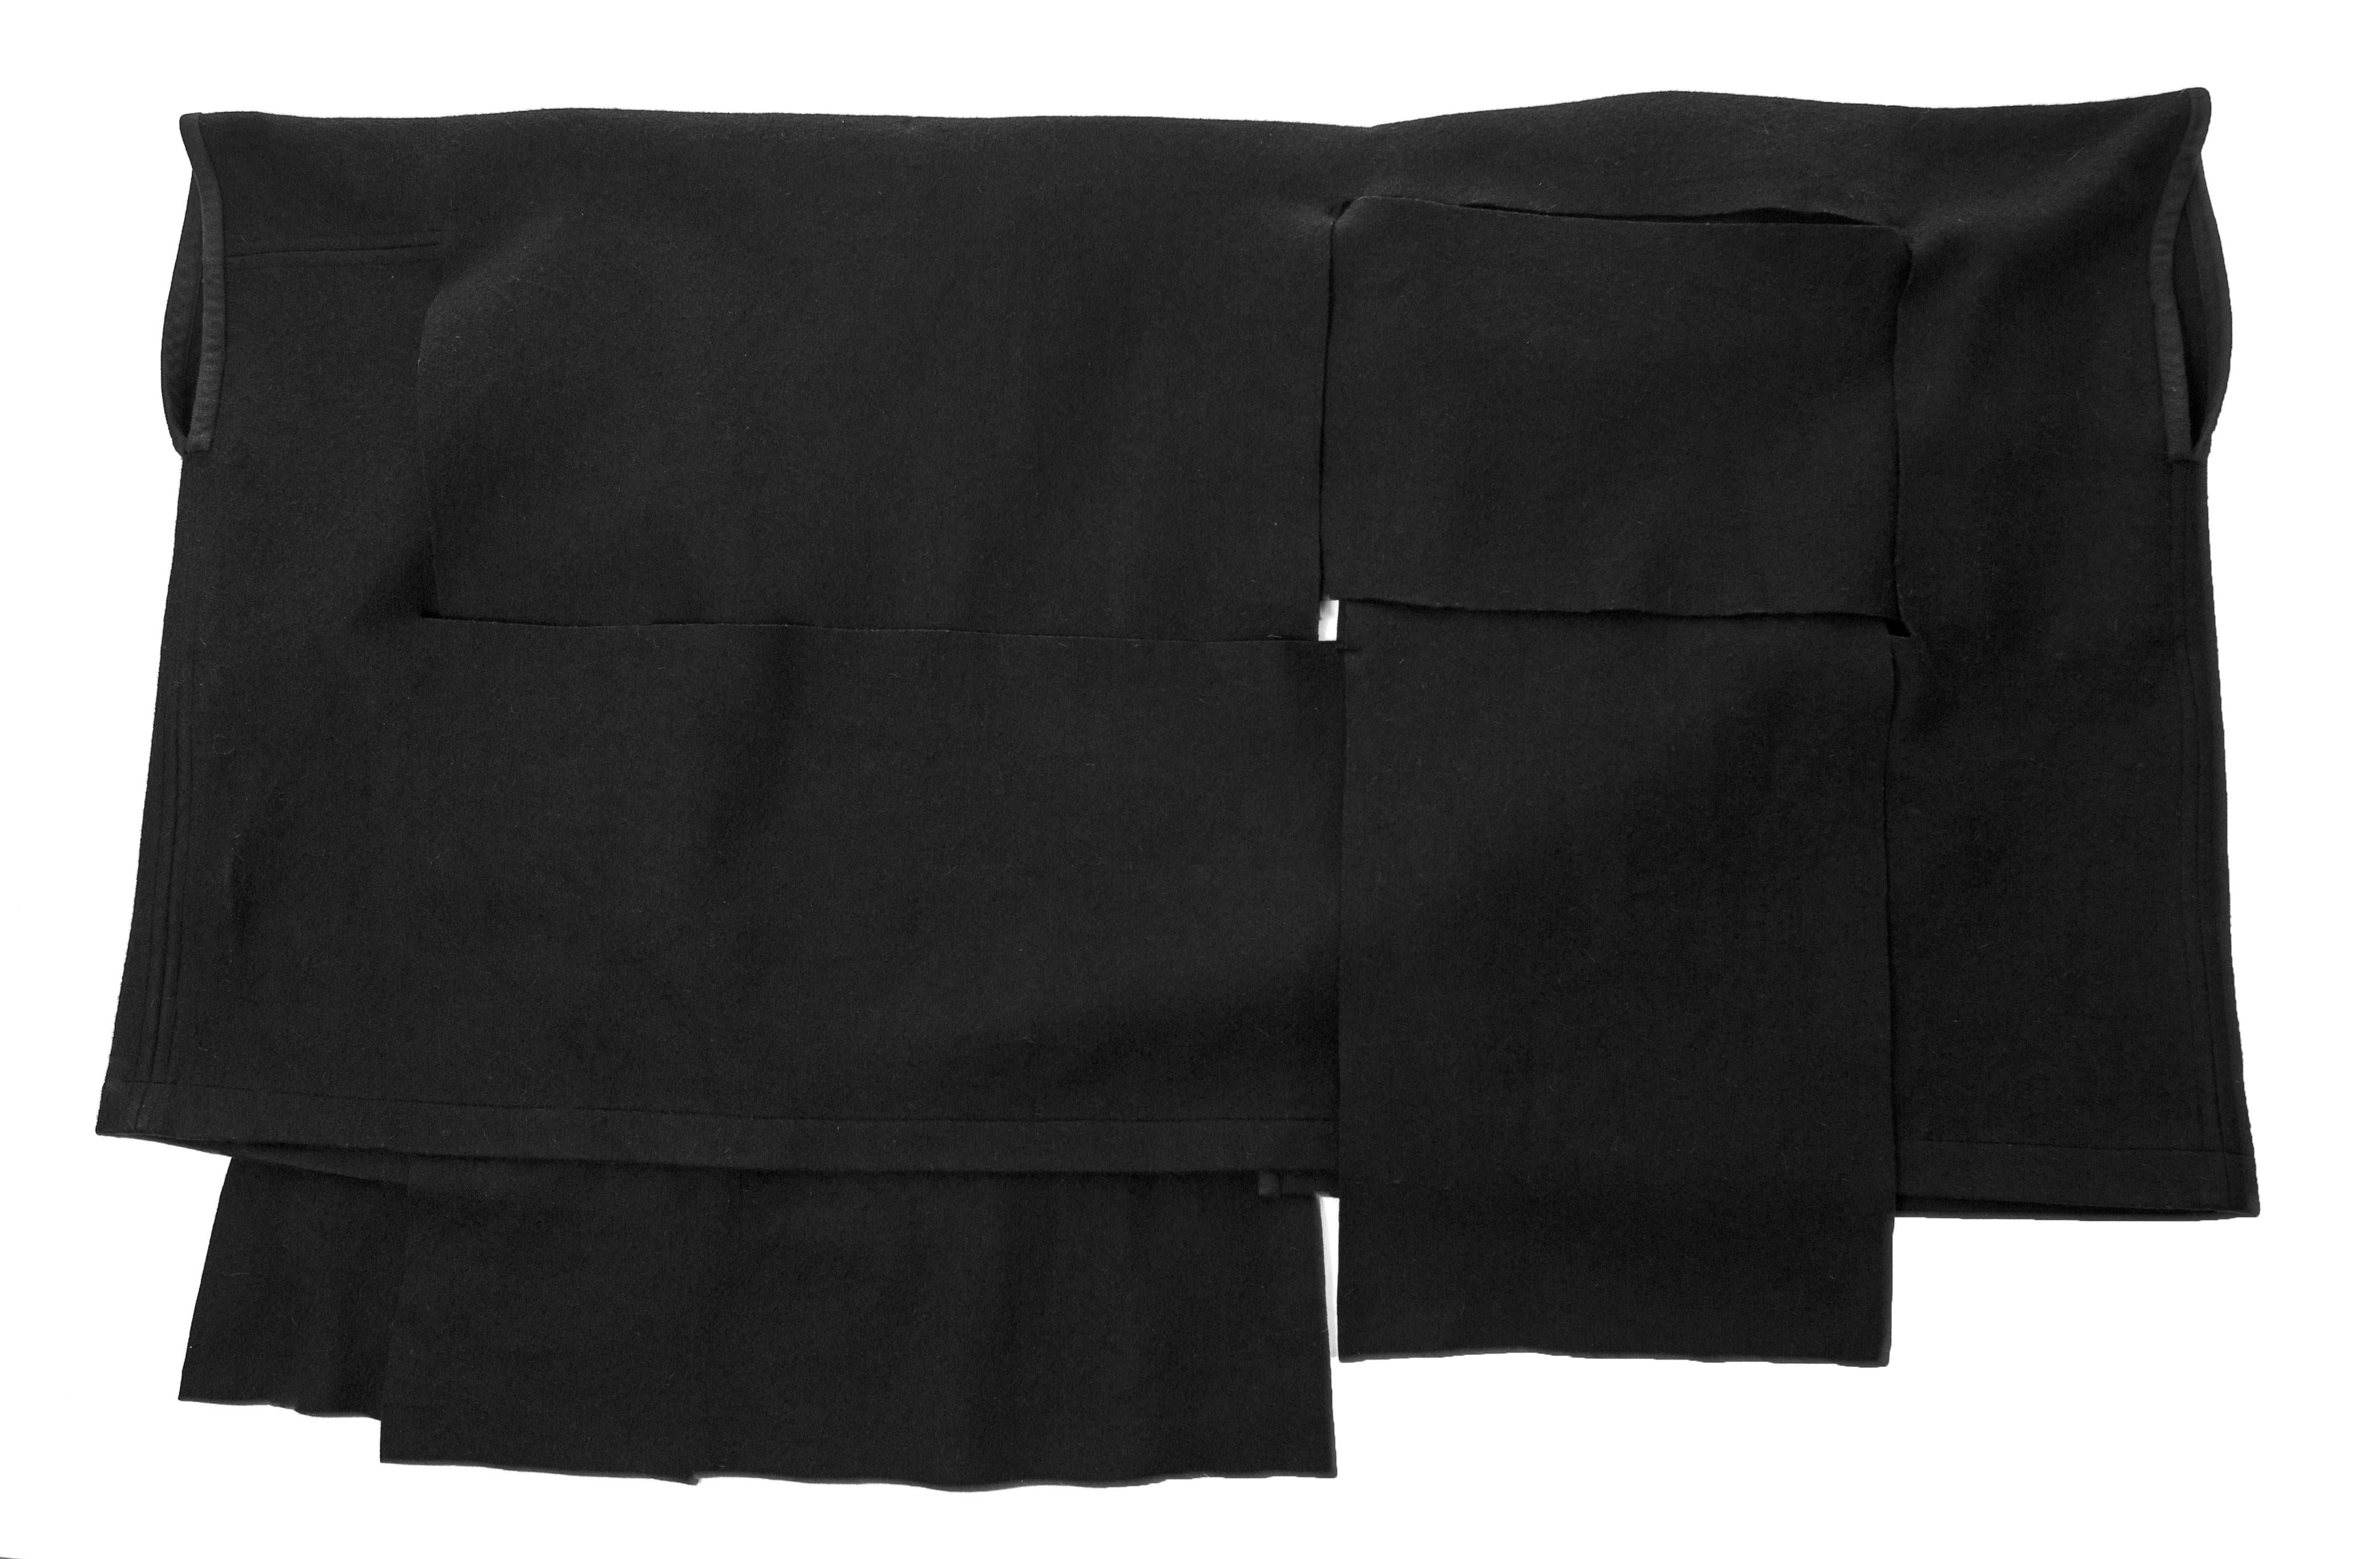 Black Comme des Garcons black wool coat constructed from large woven panels, AW 1983